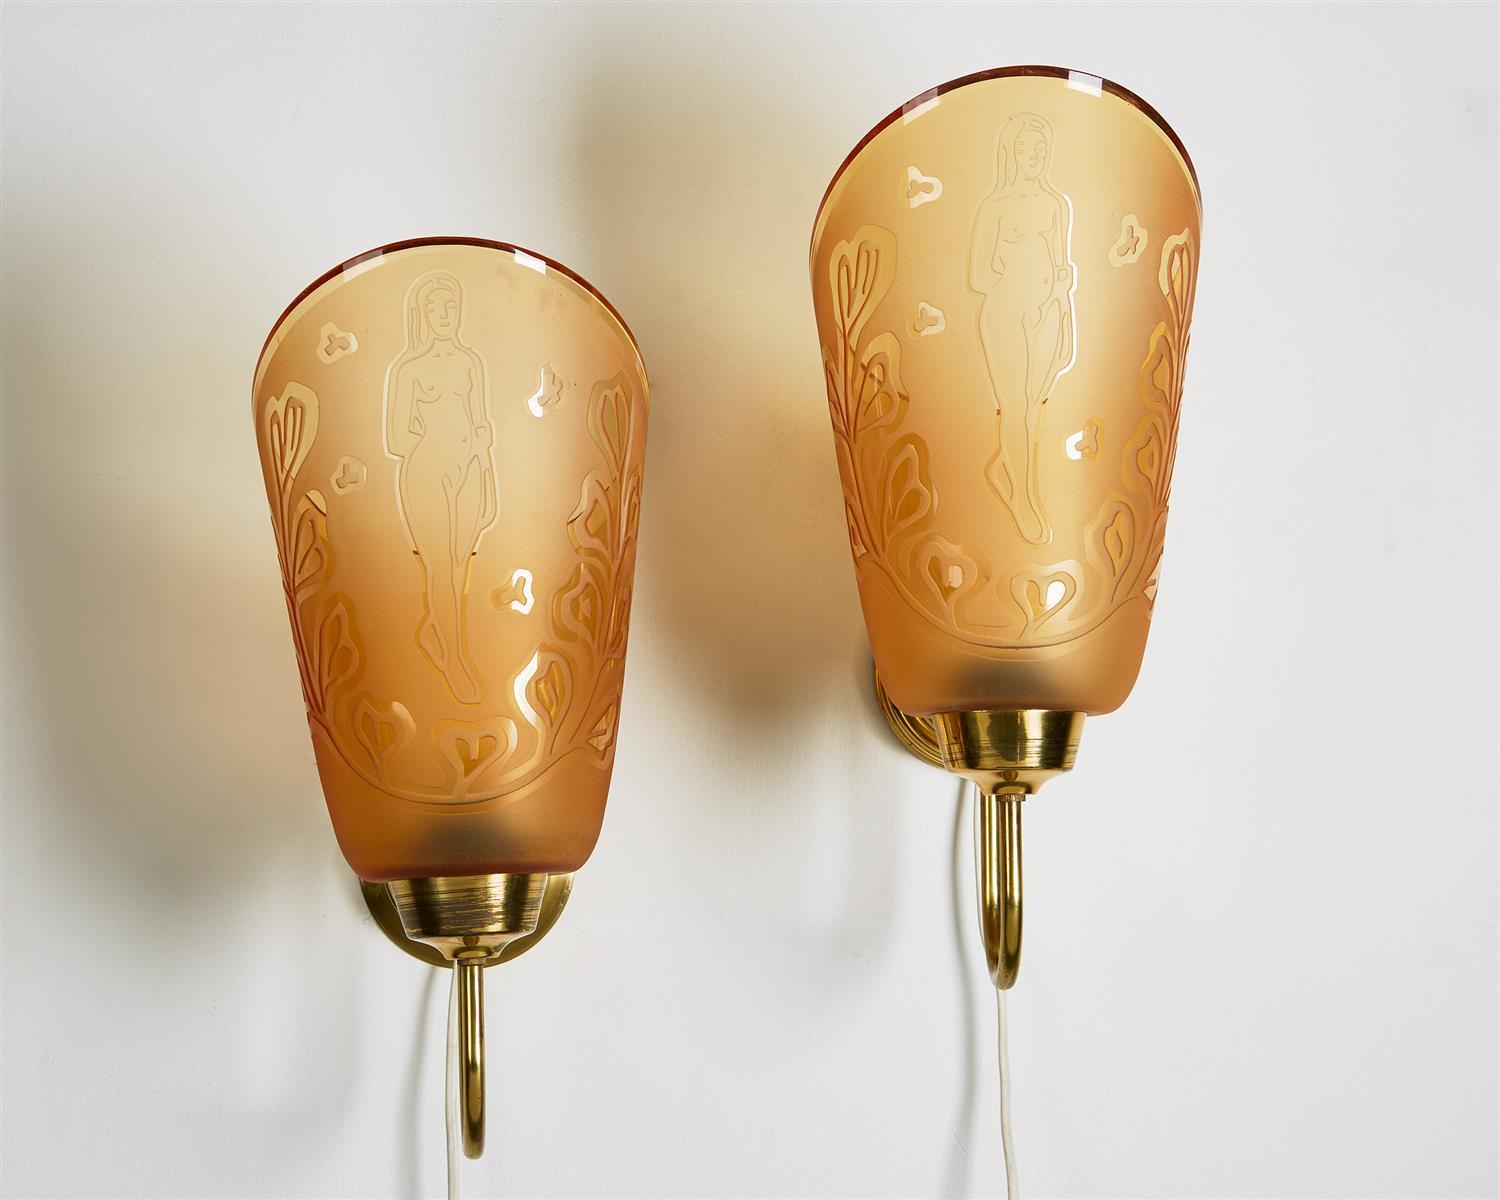 Engraved Pair of Wall Lamps Designed by Bo Notini for Glössner, Sweden, 1940s